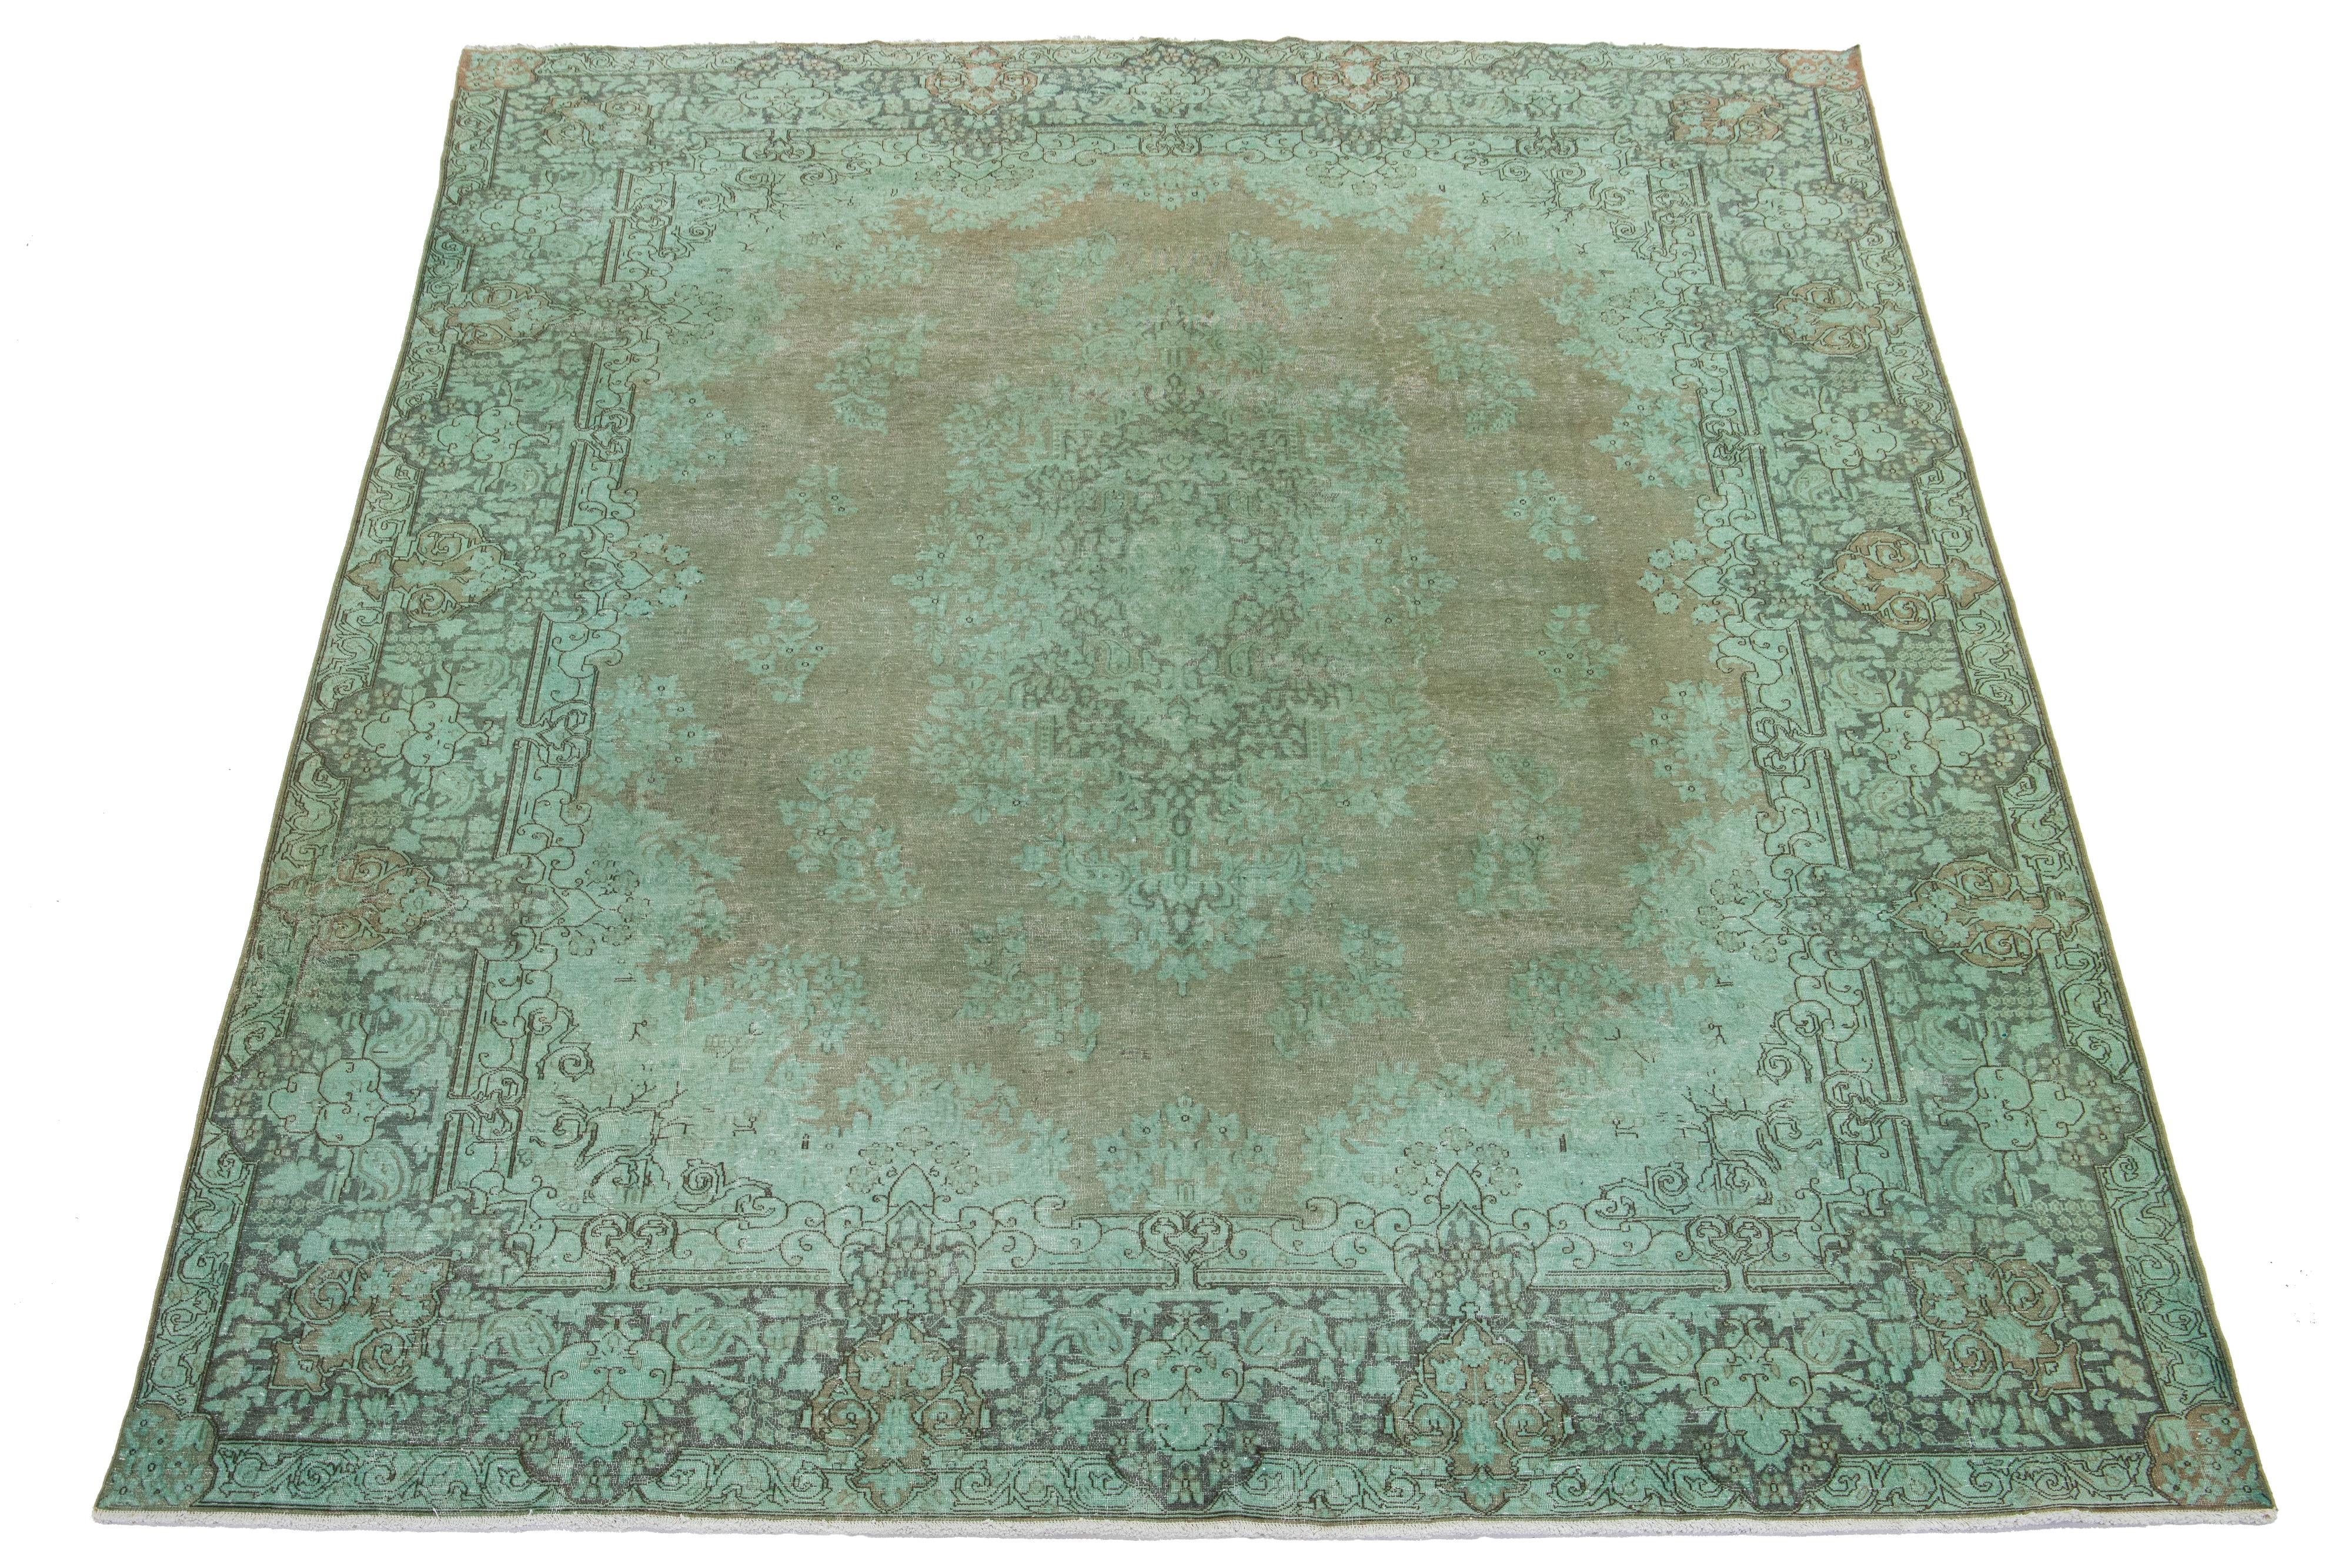 This green, antique, hand-knotted Persian wool rug has a medallion floral design and gray accents.

This rug measures 9'11'' x 12'6